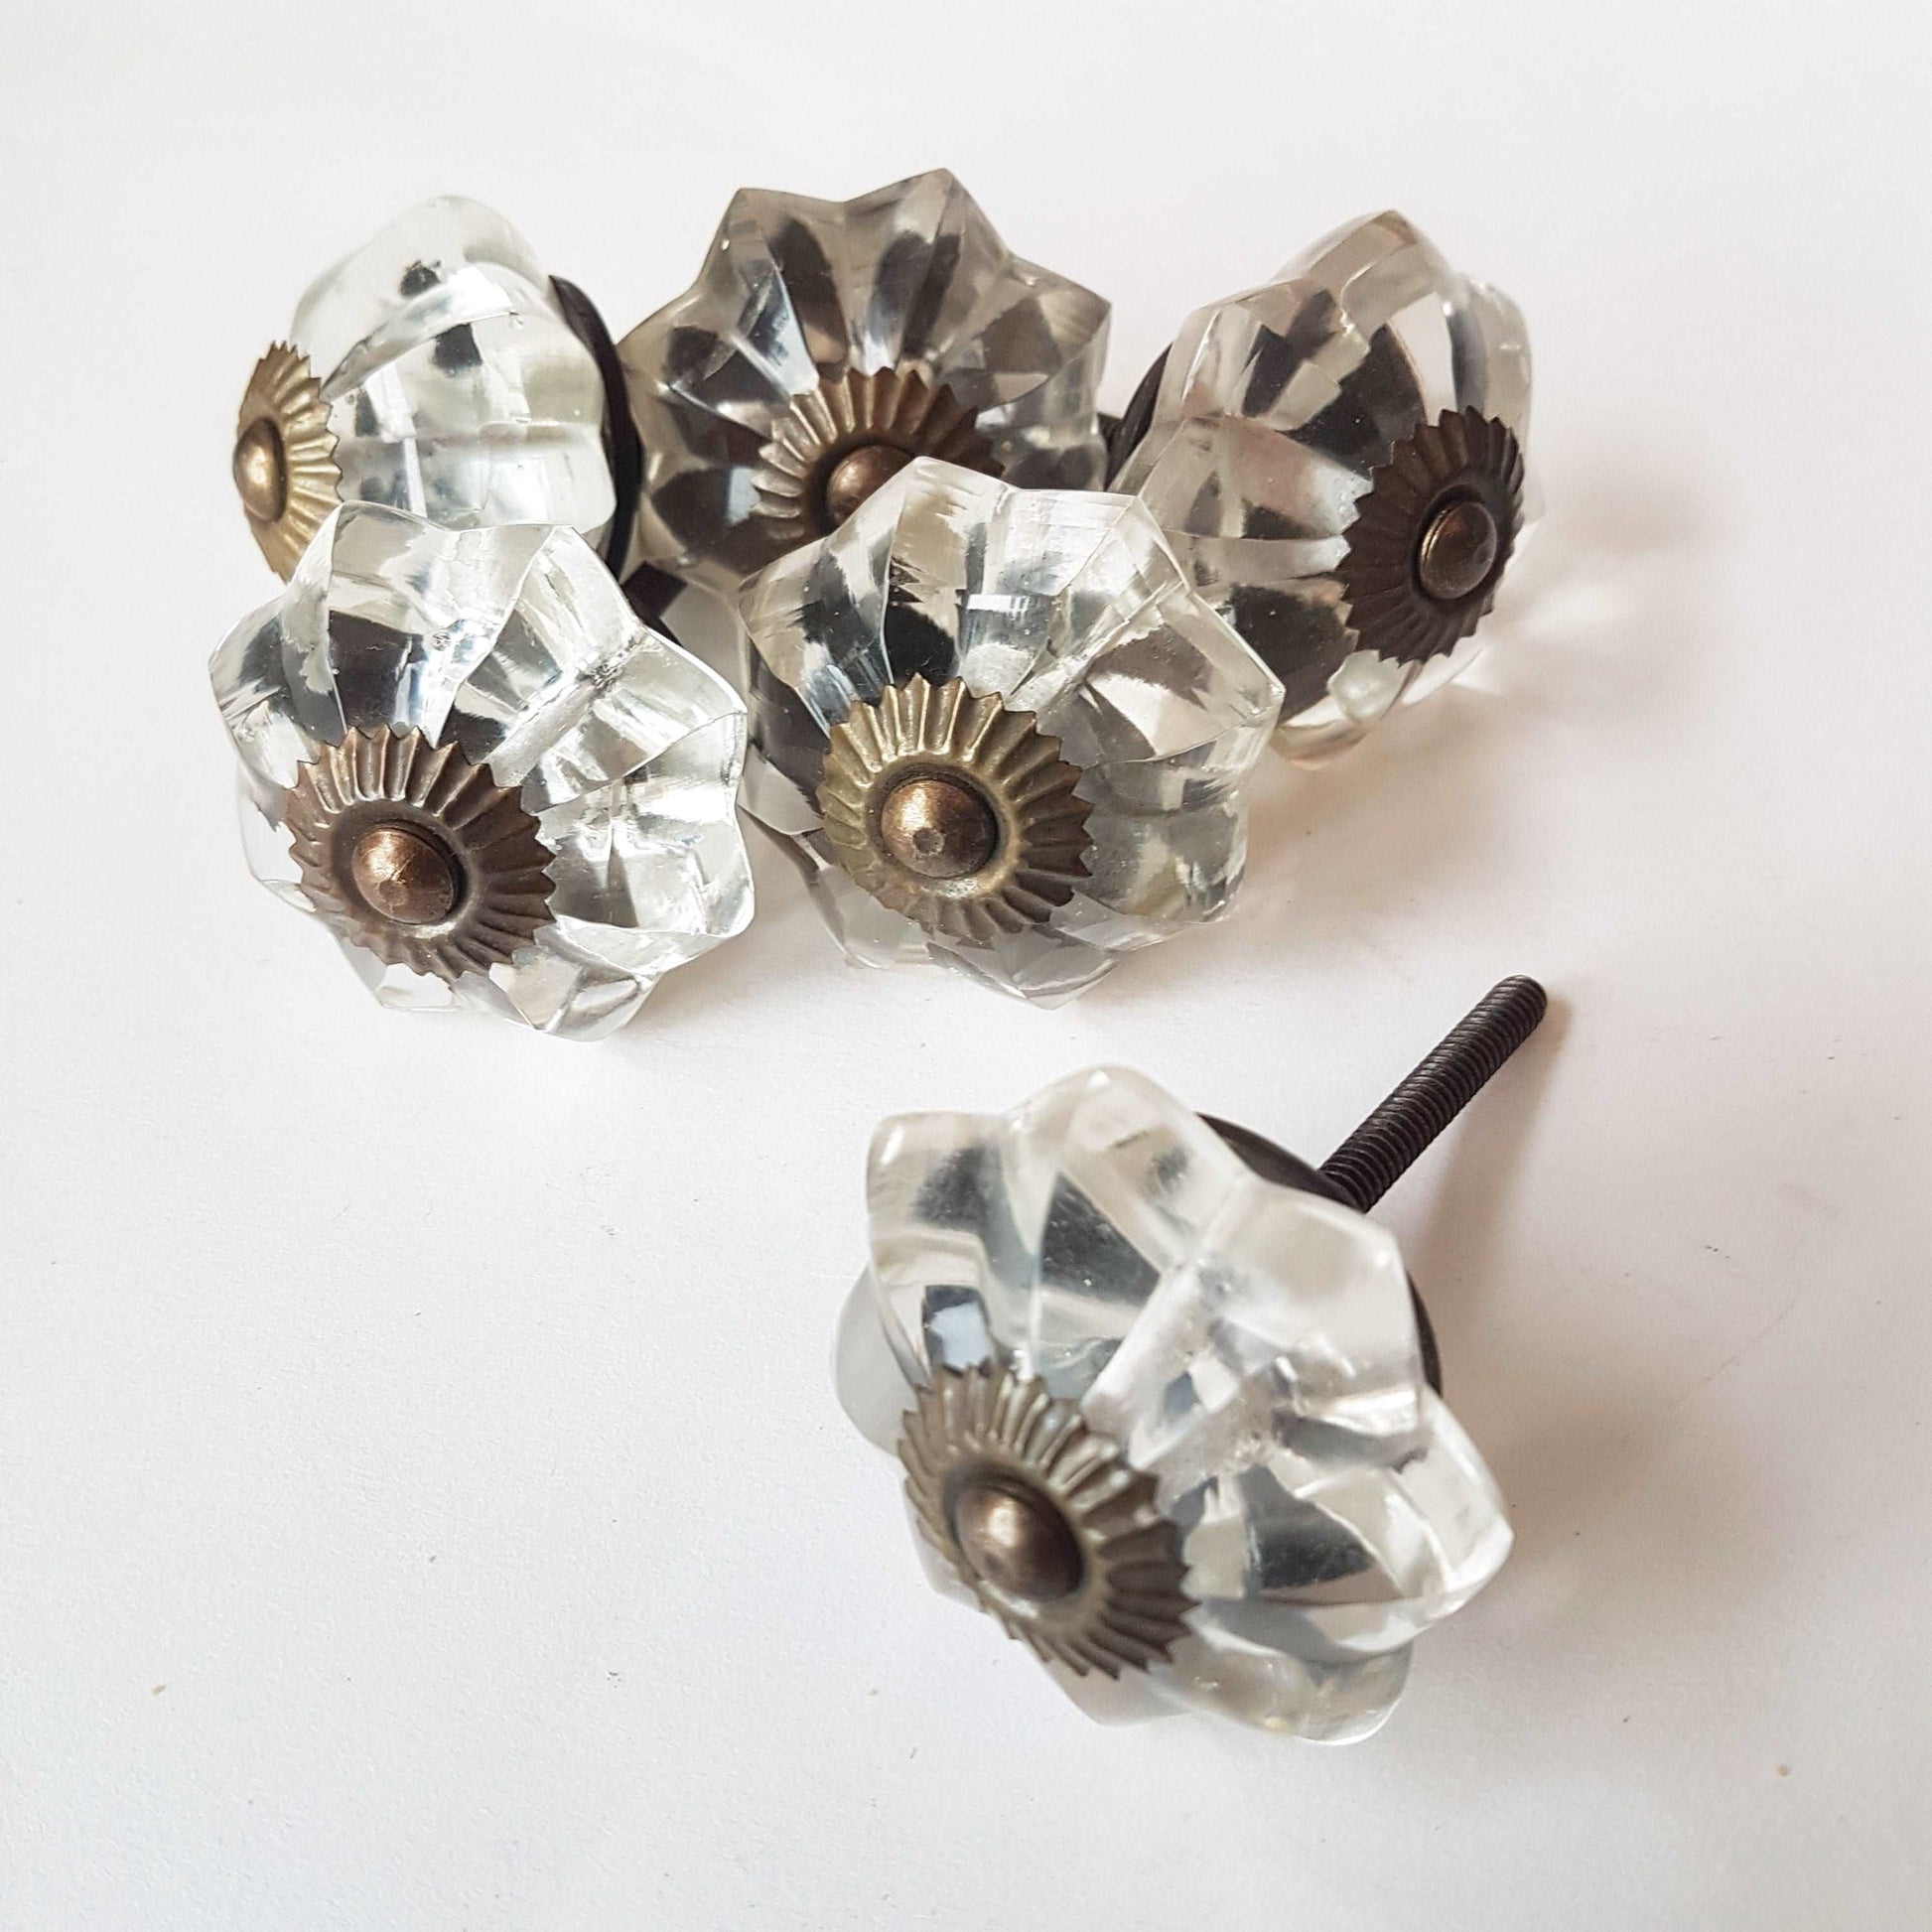 6 clear crystal cabinet knobs. Cut glass pulls in melon shape. 